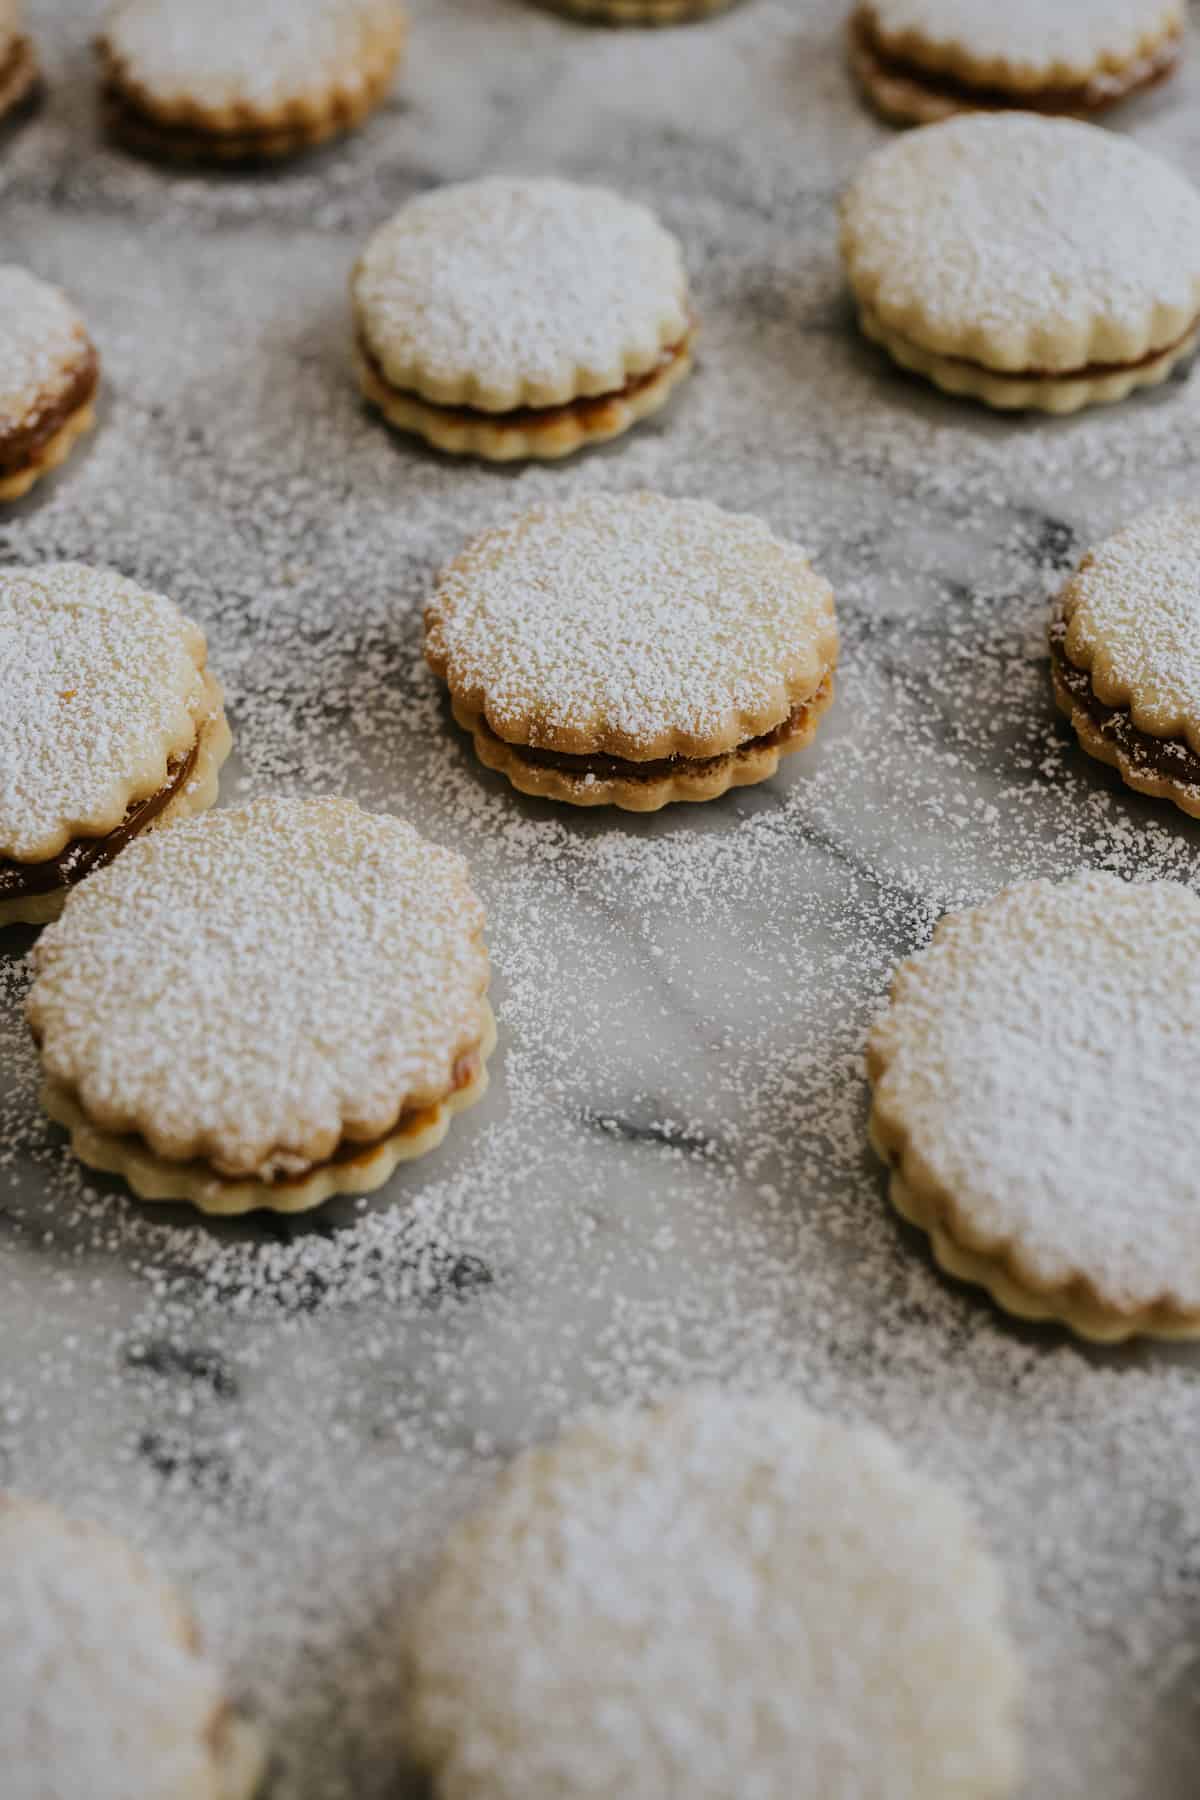 assembled alfajores on a marble slab after being dusted with powdered sugar.